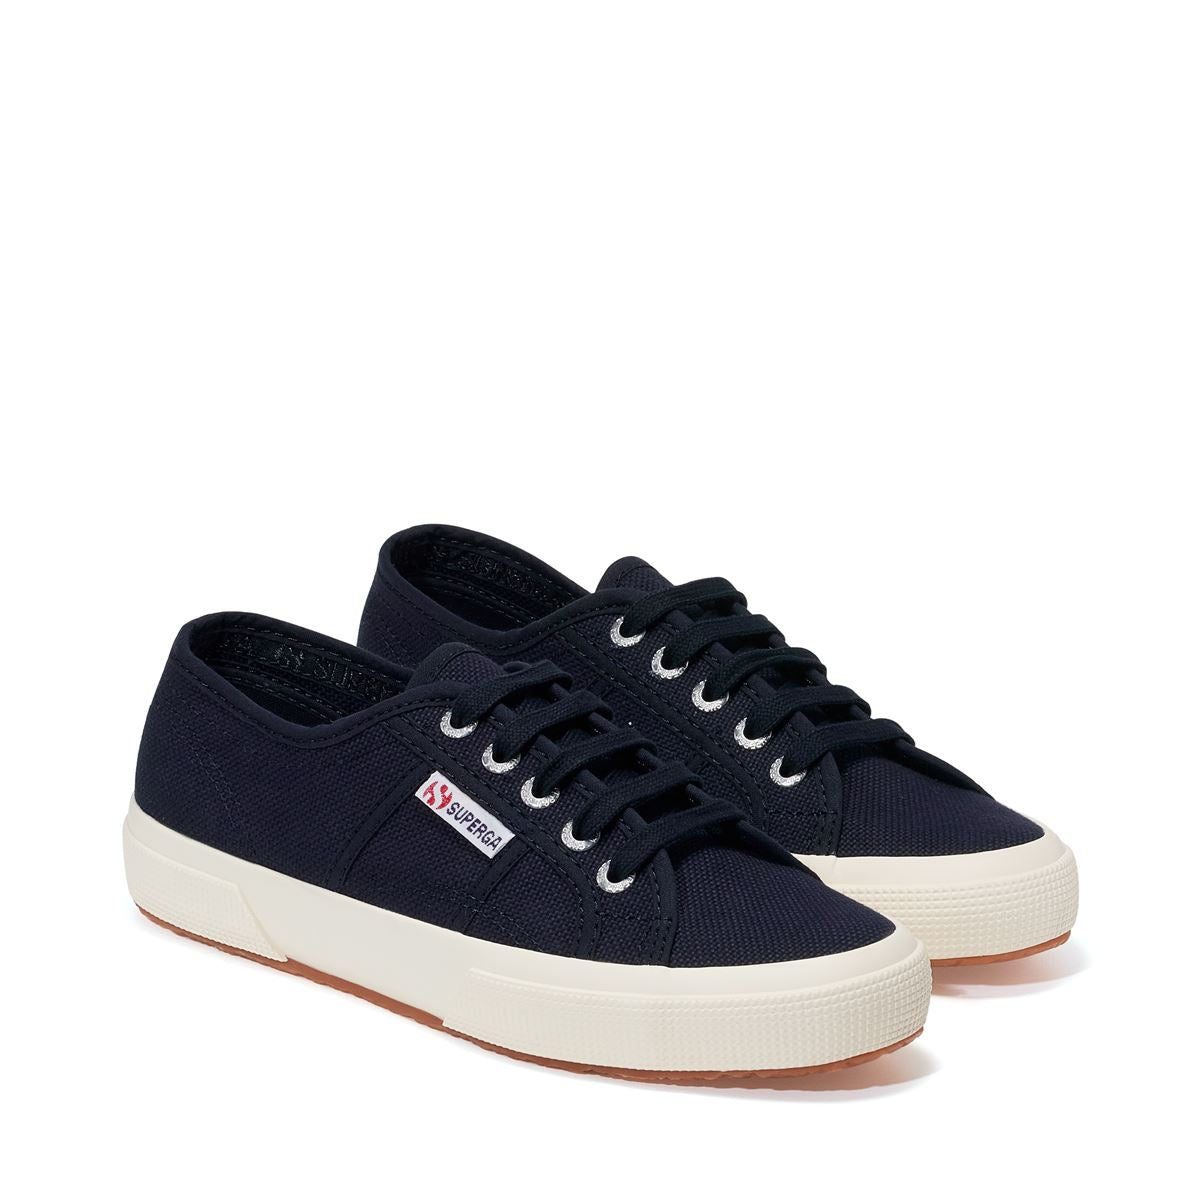 Superga 2750 Cotu Classic Sneakers - Navy Off White. Front view.